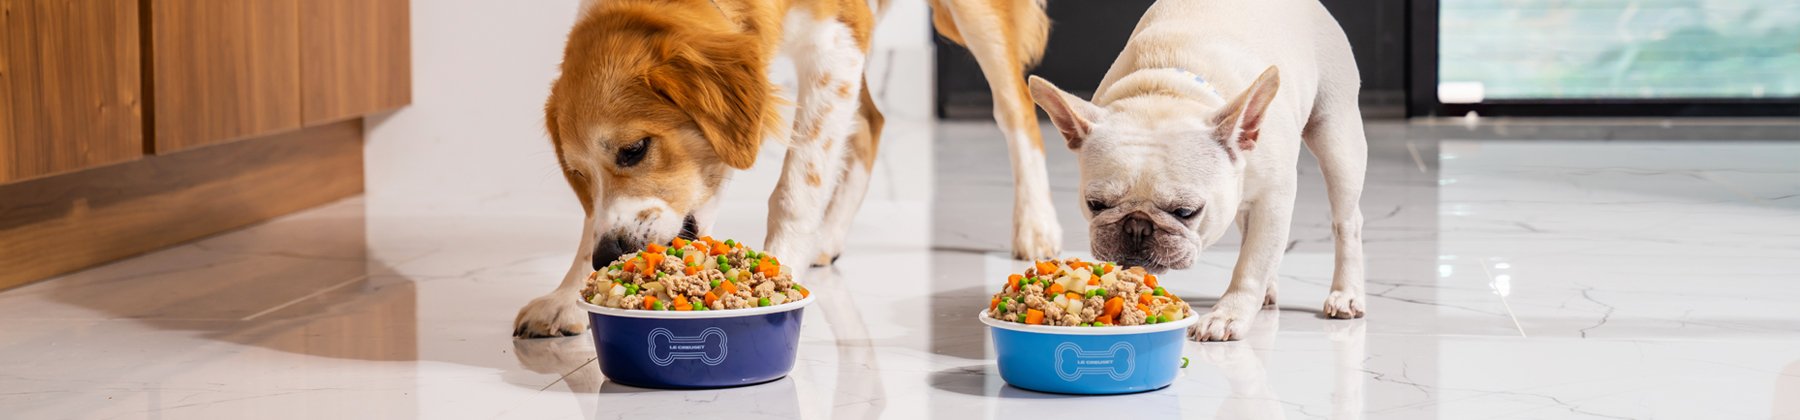 Photo of a Le Creuset pet bowls on the floor while 2 dogs eat from them.